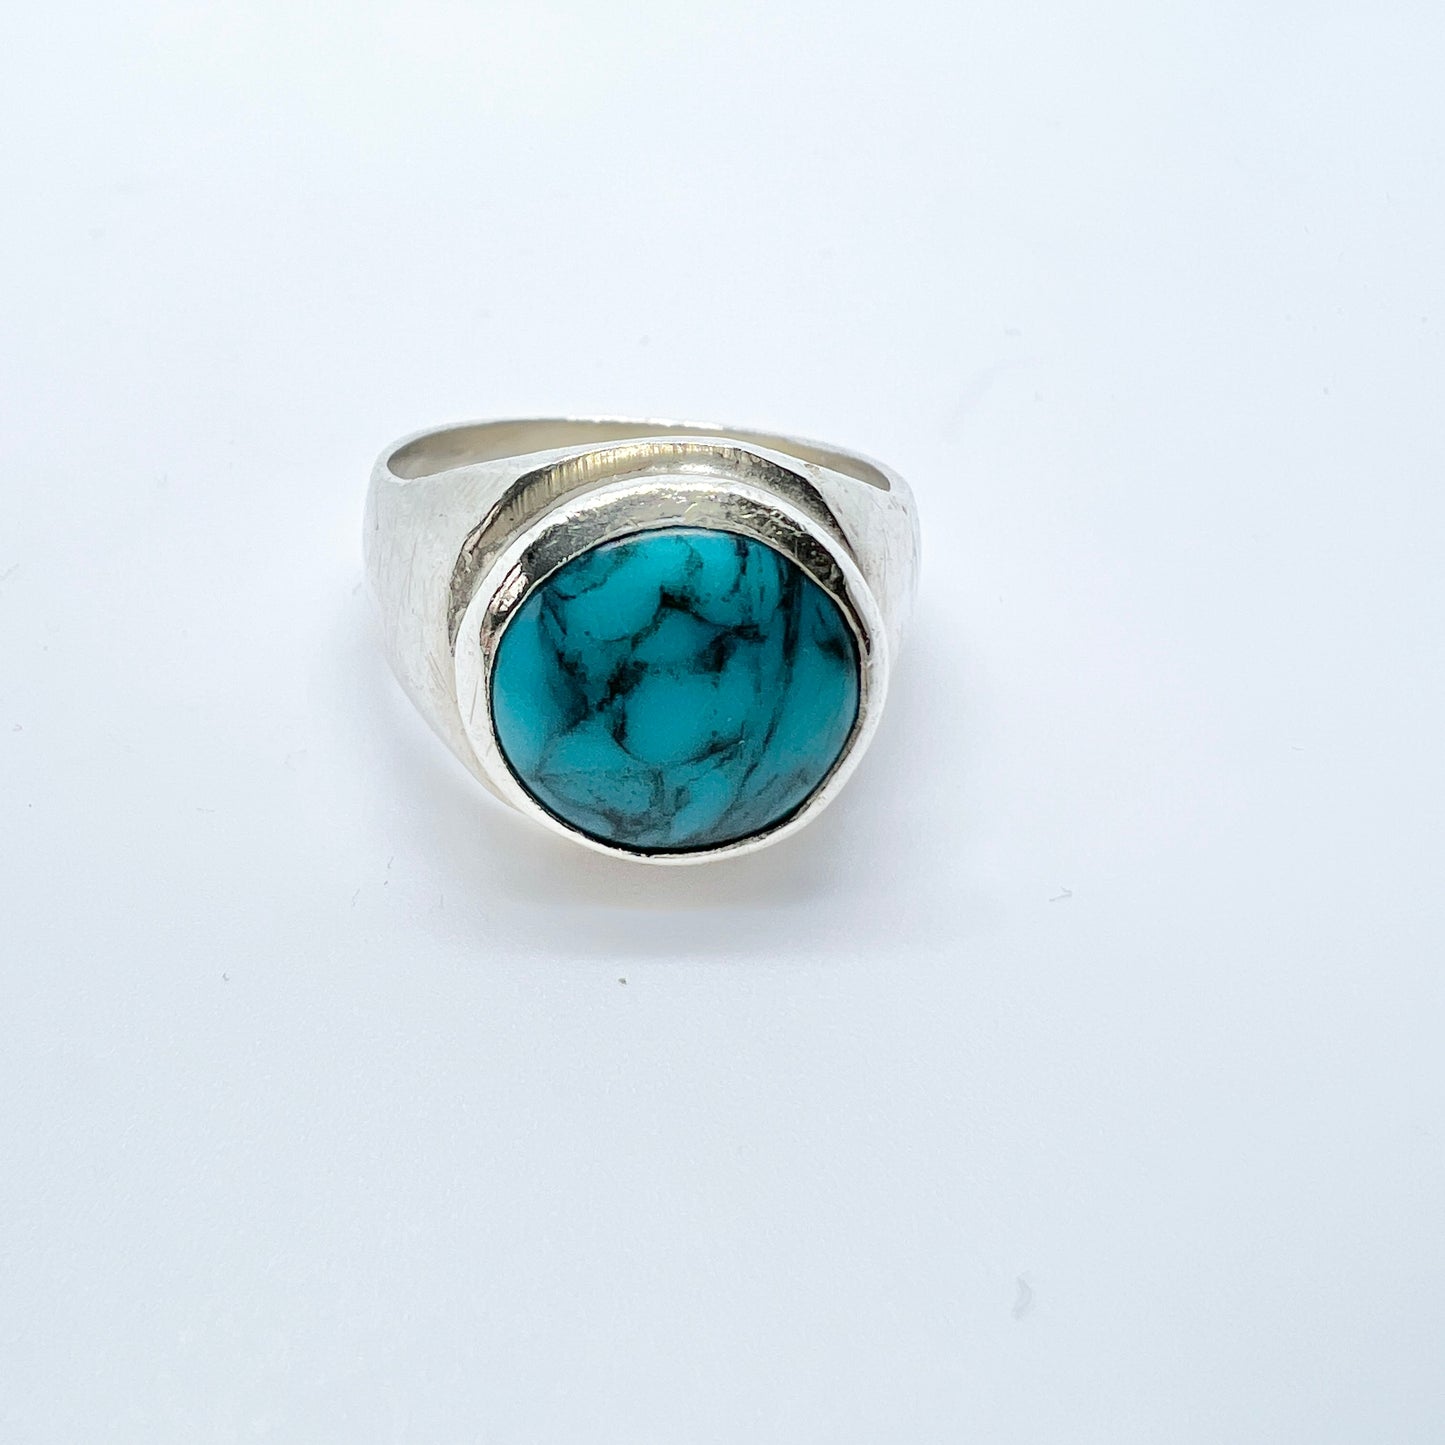 Mexico c 1950s. Sterling Silver Turquoise Ring